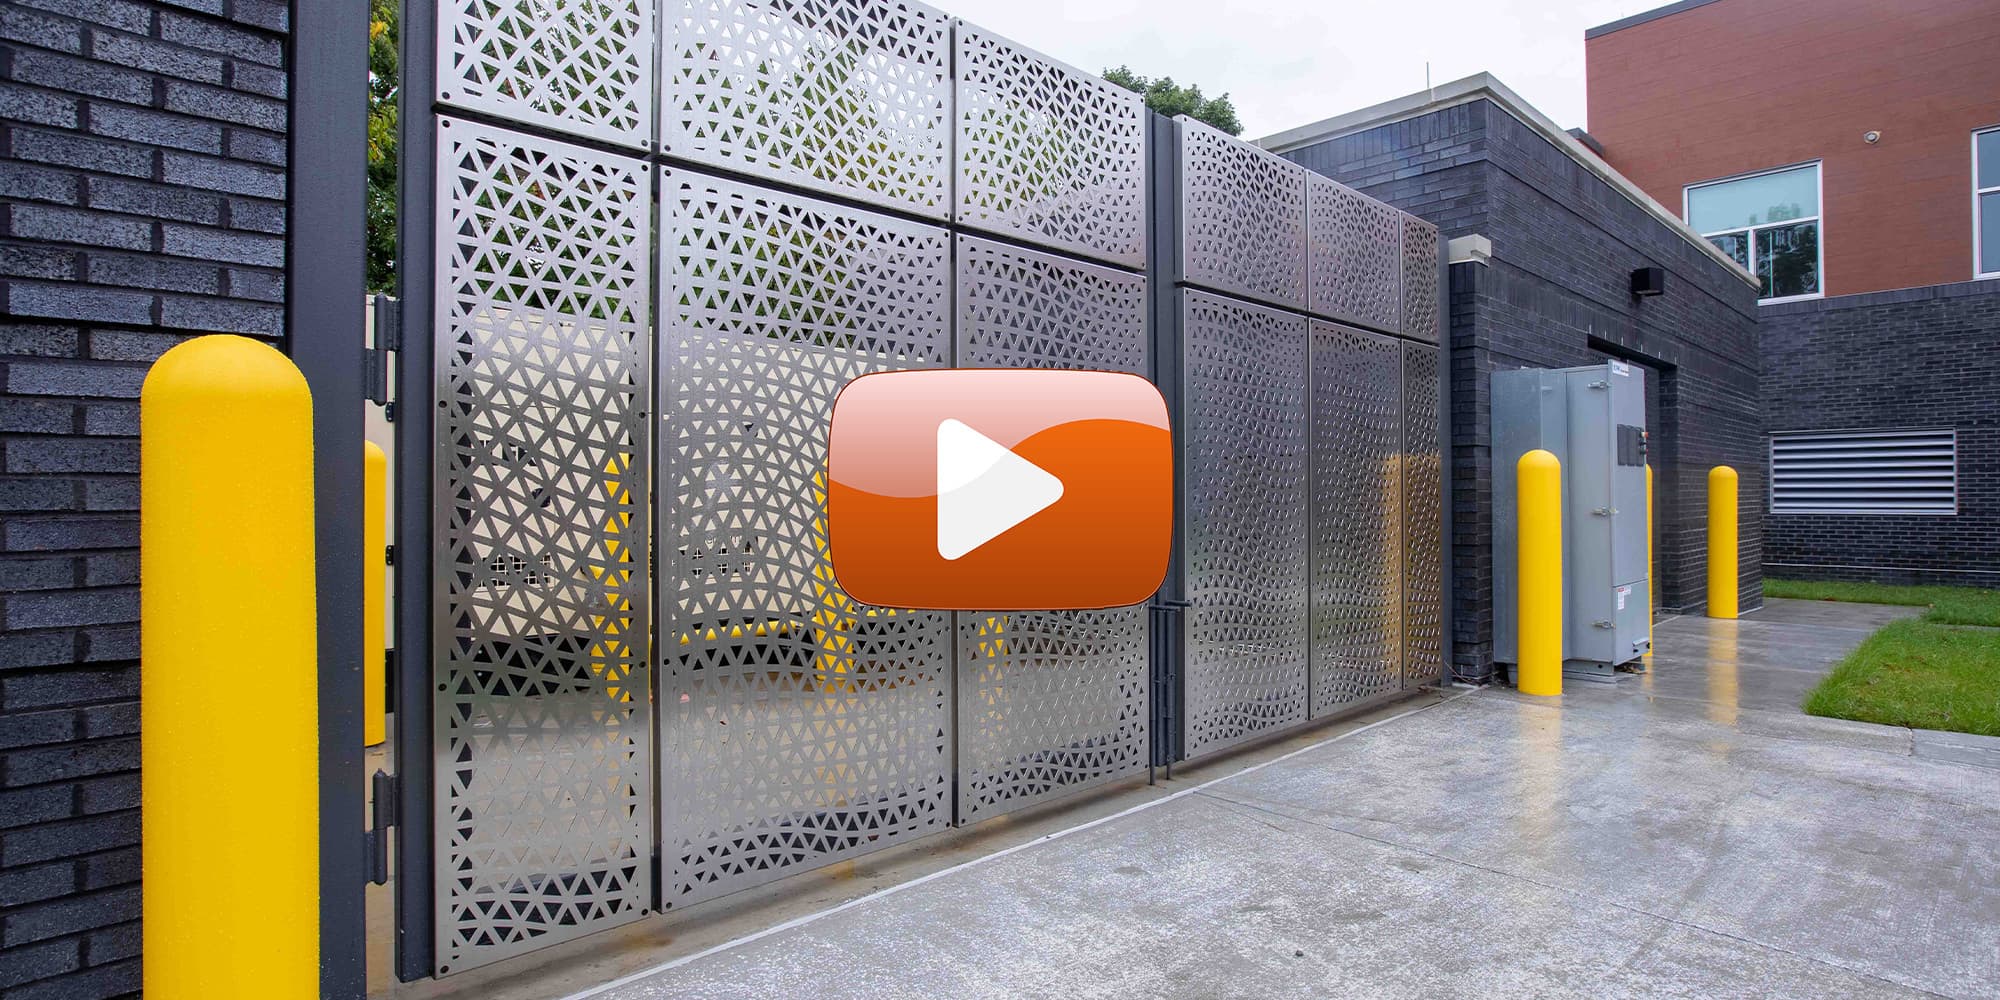 Viva railings sterling park safety center fence and landscape screens metalspaces